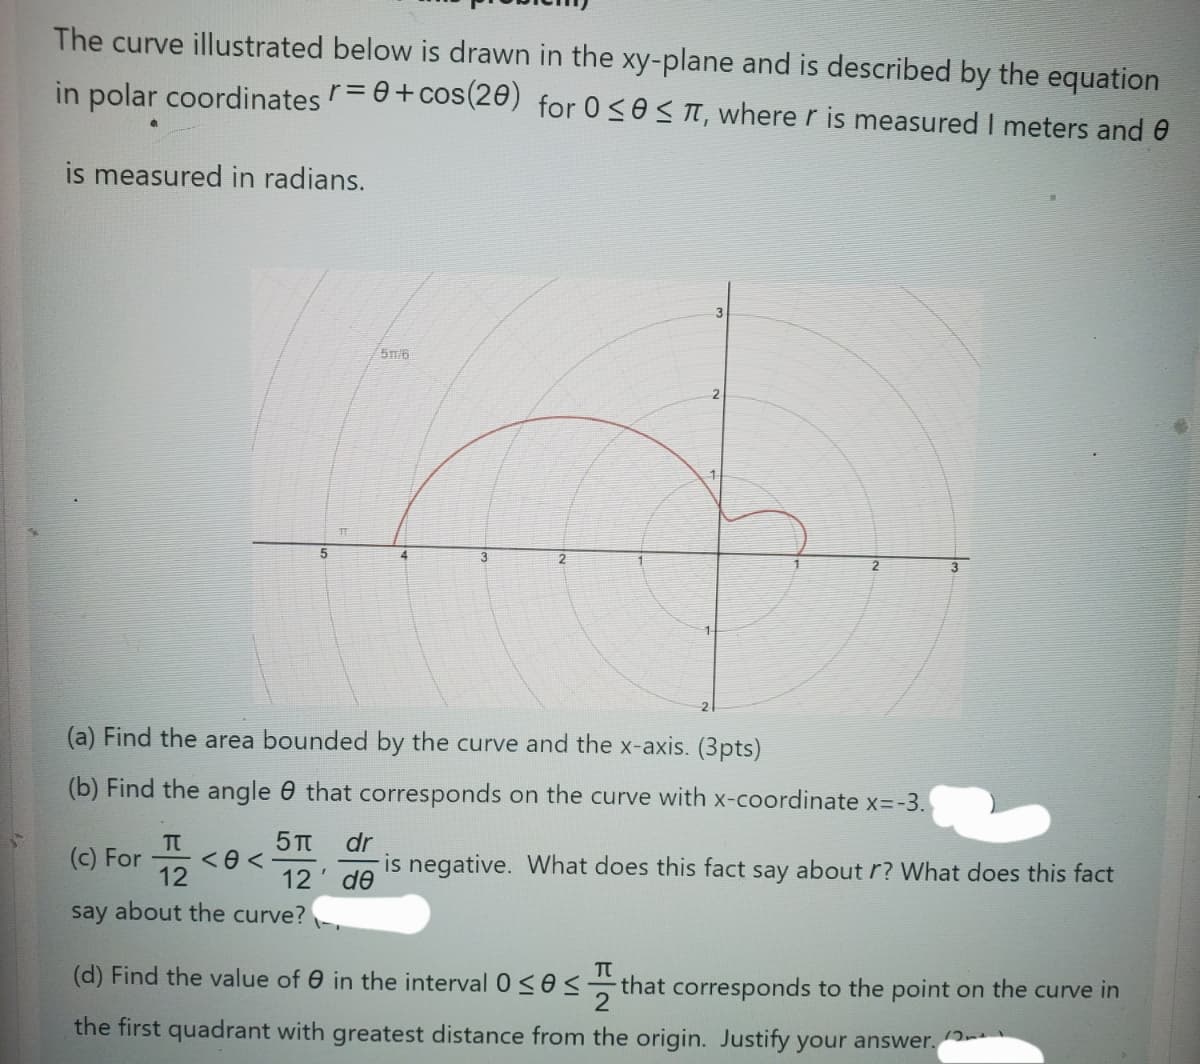 The curve illustrated below is drawn in the xy-plane and
described by the equation
in polar coordinates r = 0 + cos(20) for 0≤0≤π, where r is measured I meters and
is measured in radians.
5m/6
5
4
3
2
2
(a) Find the area bounded by the curve and the x-axis. (3pts)
(b) Find the angle that corresponds on the curve with x-coordinate x=-3.
(c) For <<
Π
12
5π dr
12' de
is negative. What does this fact say about r? What does this fact
say about the curve?
Π
(d) Find the value of 0 in the interval 0≤0.
that corresponds to the point on the curve in
the first quadrant with greatest distance from the origin. Justify your answer.
111